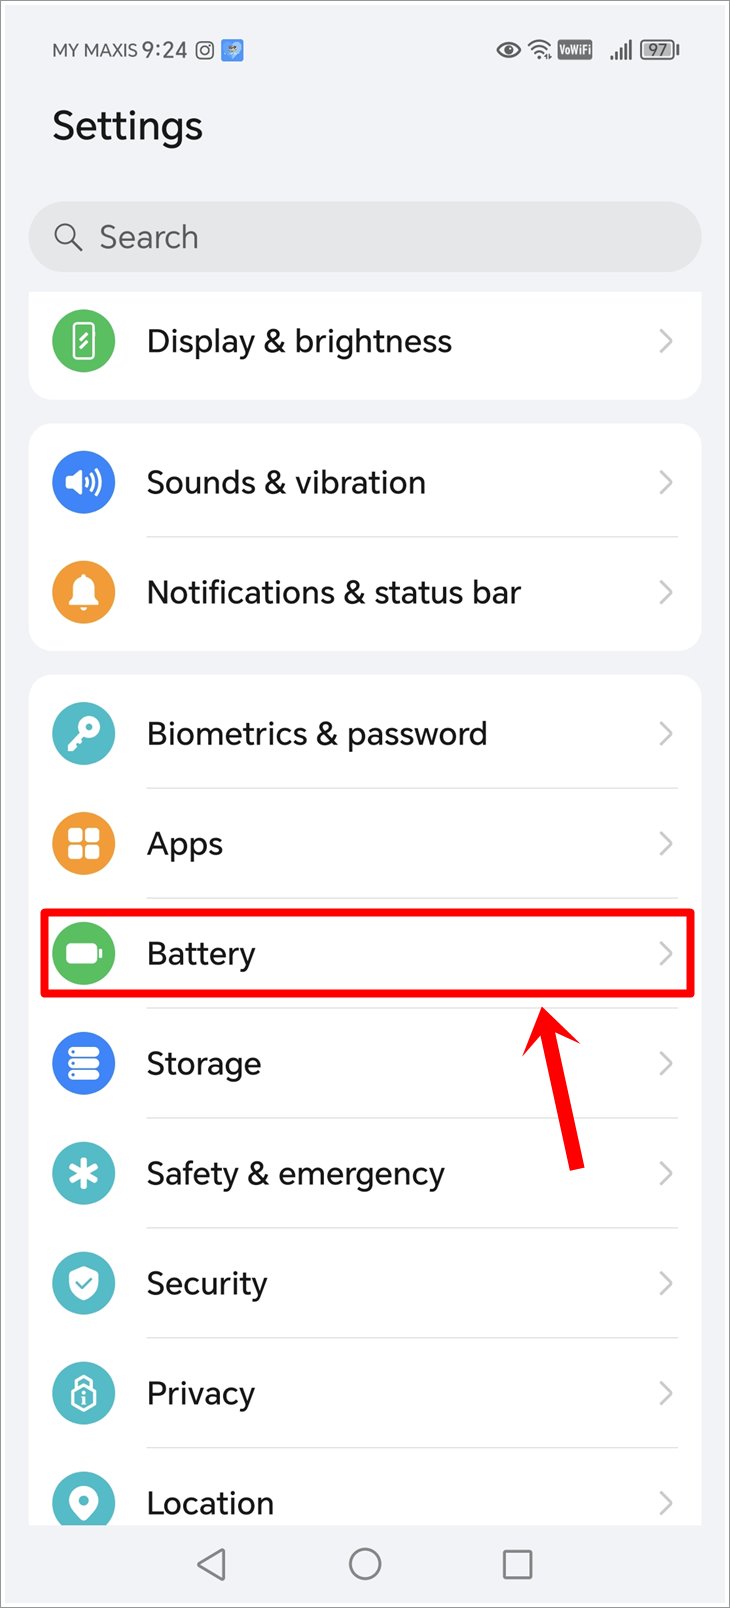 This is a screenshot of an Android phone's Settings page, with the 'Battery' option highlighted.